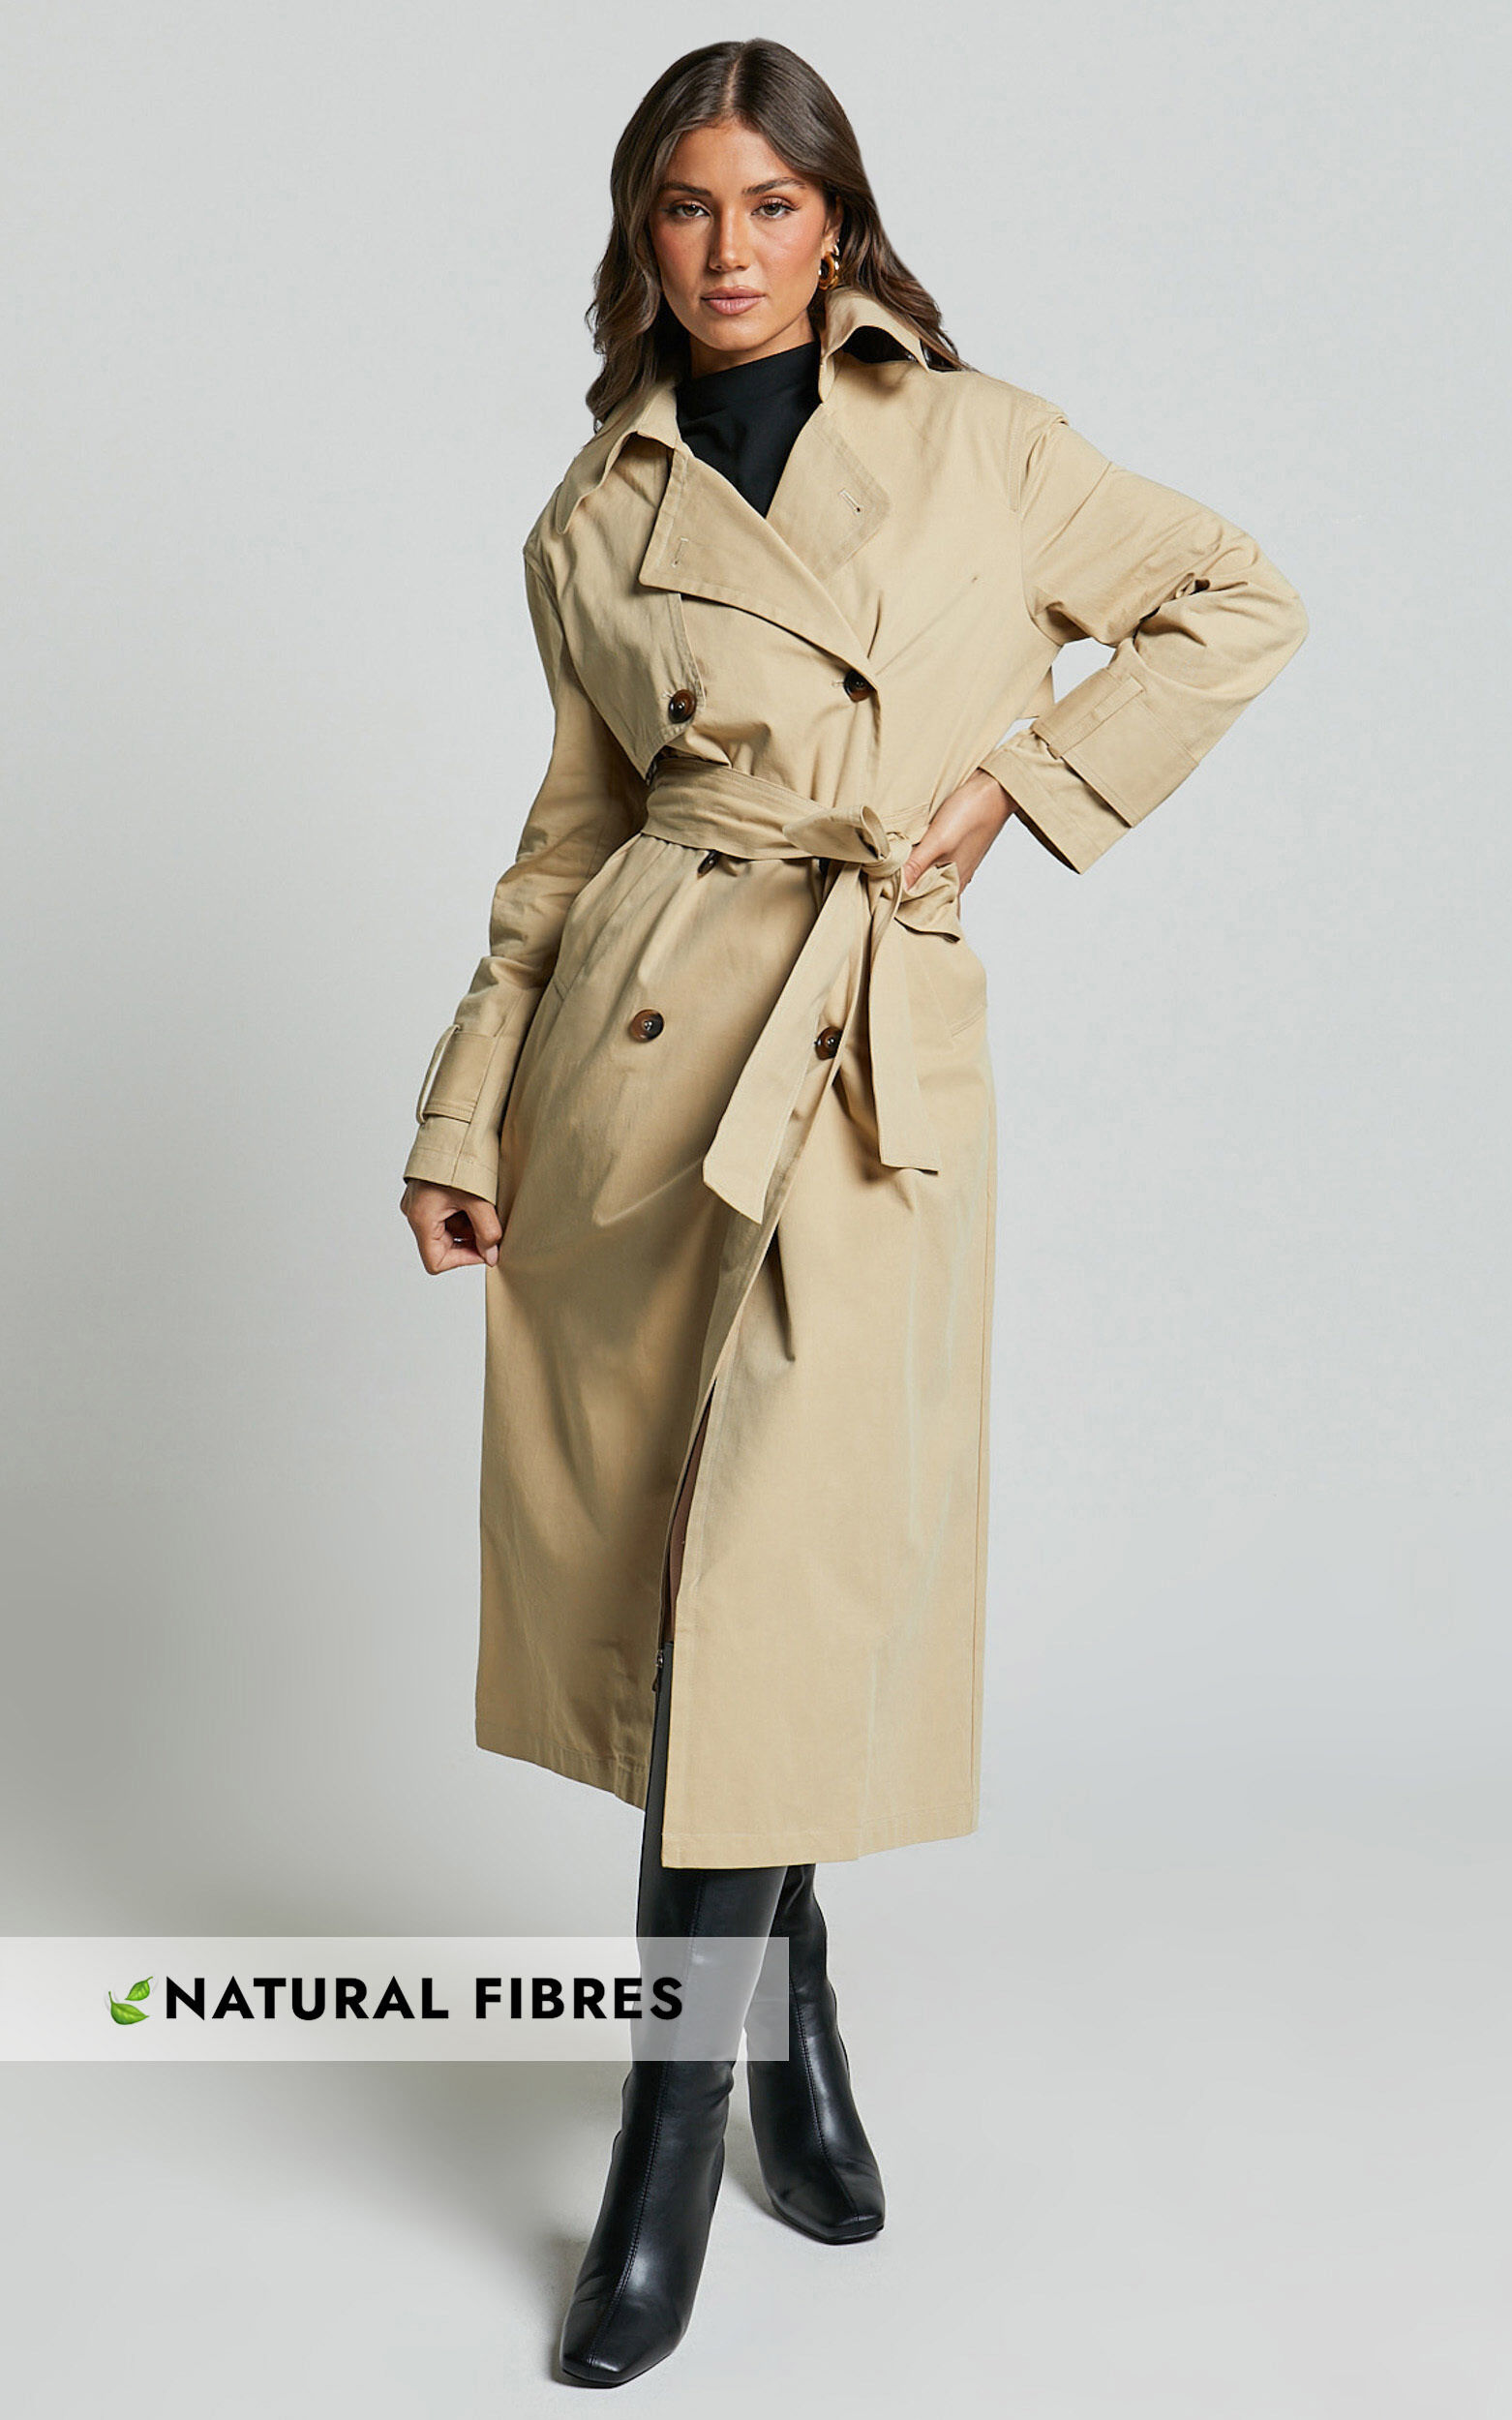 Avah Trench Coat - Double Breasted Tie Waist Coat in Camel | Showpo